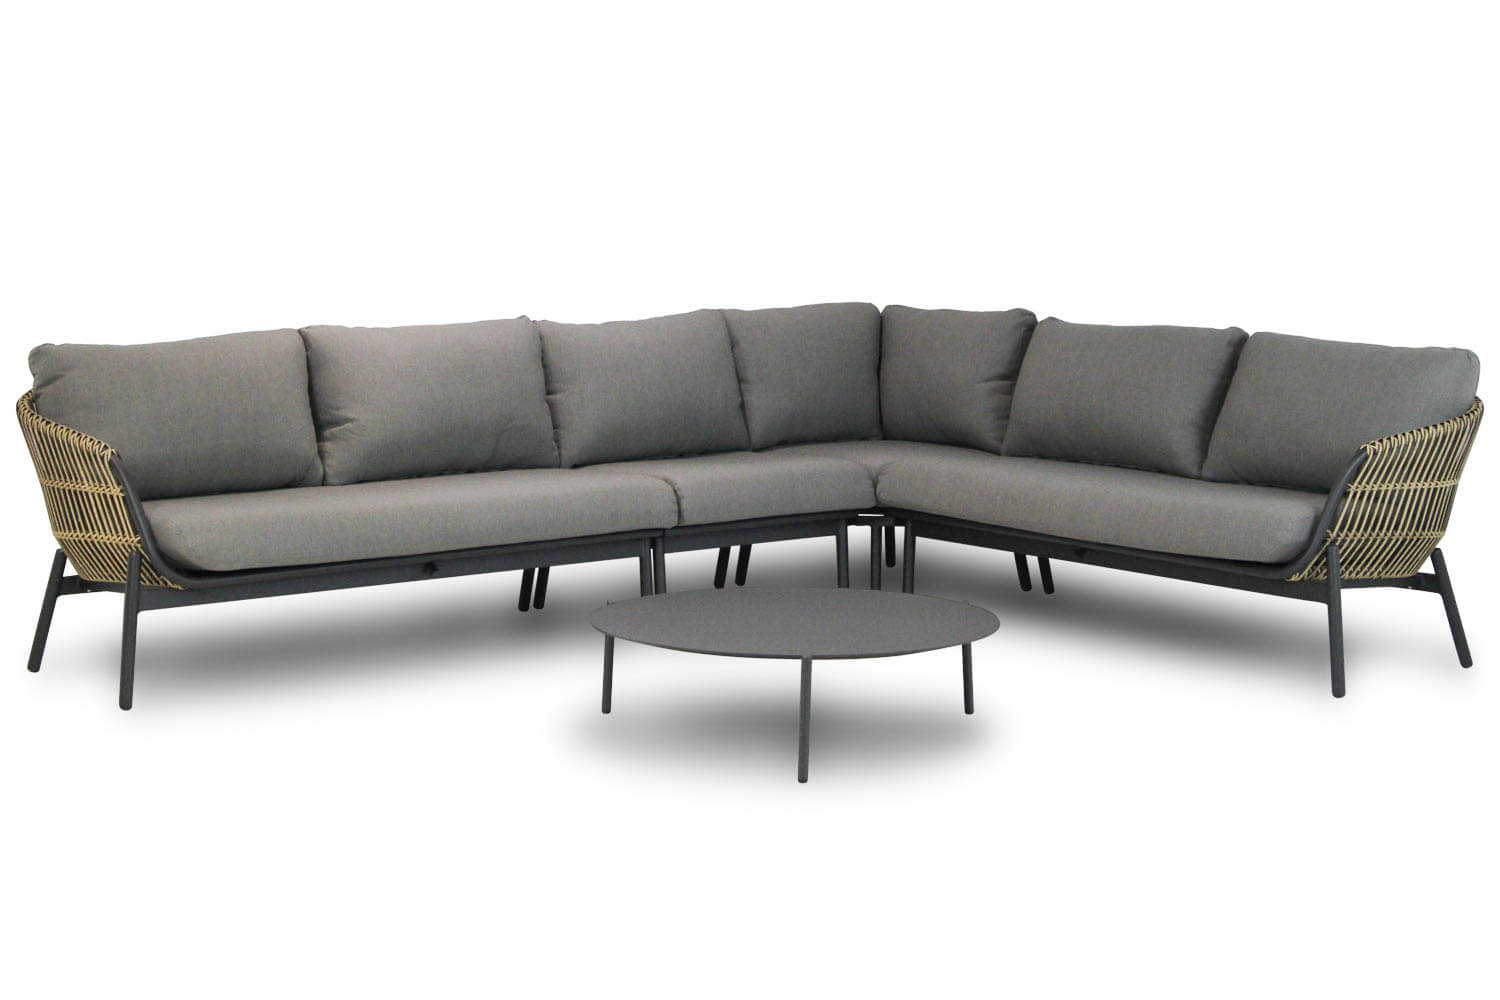 coco nathan loungeset met middenmodule pacific 100 cm - Coco Nathan/Pacific 100 cm hoek loungeset 5-delig